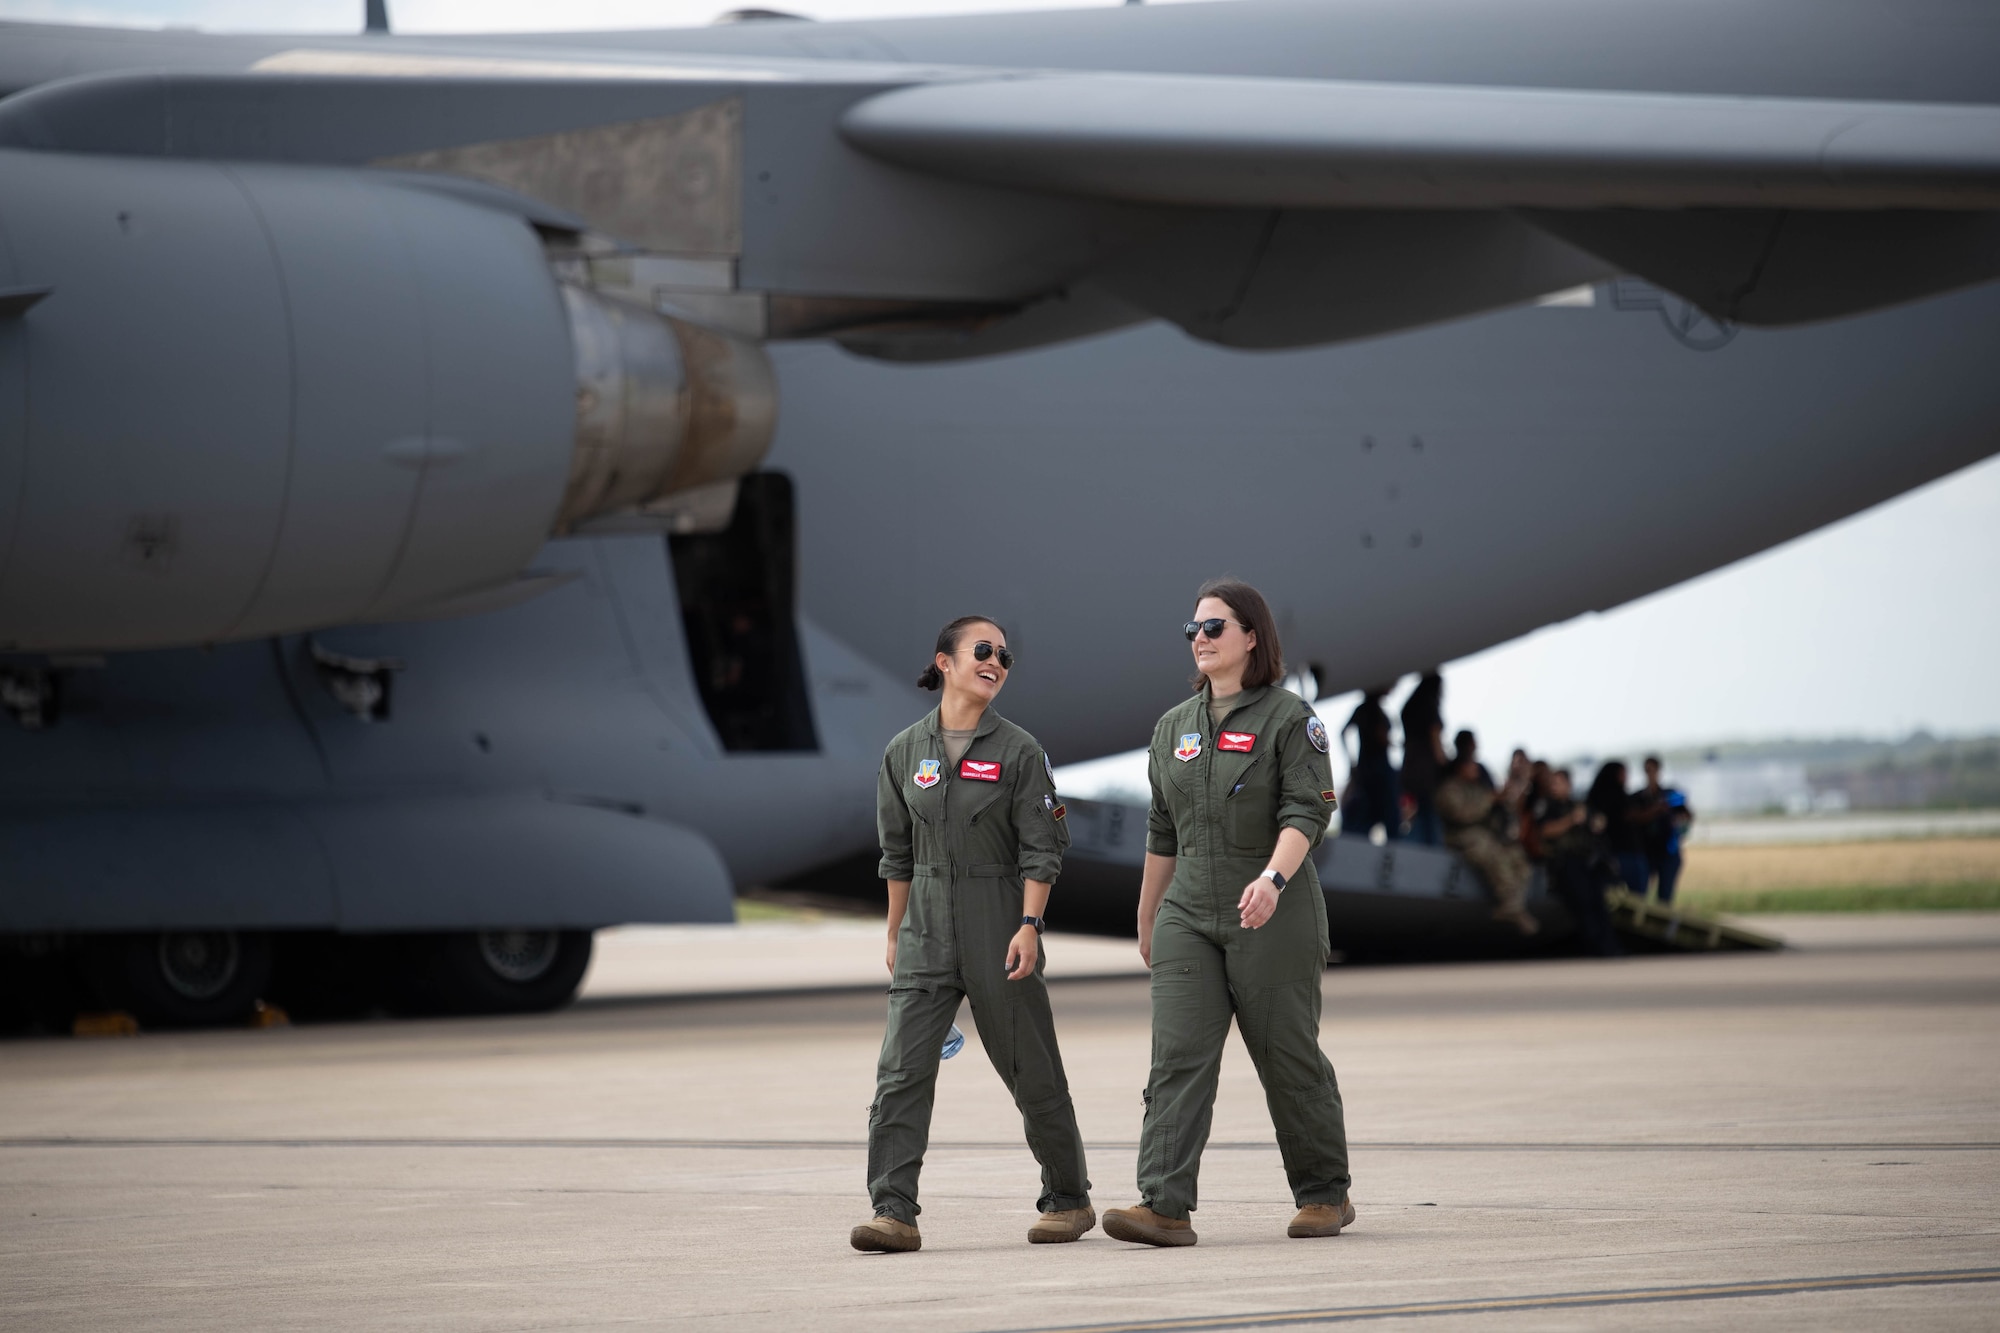 U.S. Air Force Capt. Jessica Williams and 1st Lt Gabrielle Giuliano, MQ-9 Reaper pilots assigned to the 867th Attack Squadron at Creech Air Force Base arrive at the Torch Athena Girls in Aviation Day Celebration, Joint Base San Antonio-Lackland Kelly Field, Texas, Sept. 21, 2023. About 400 local students attended the event, which showcased women from across Air Education and Training Command and their aircraft. The women represented various career fields, such as pilots, maintainers and boom operators.